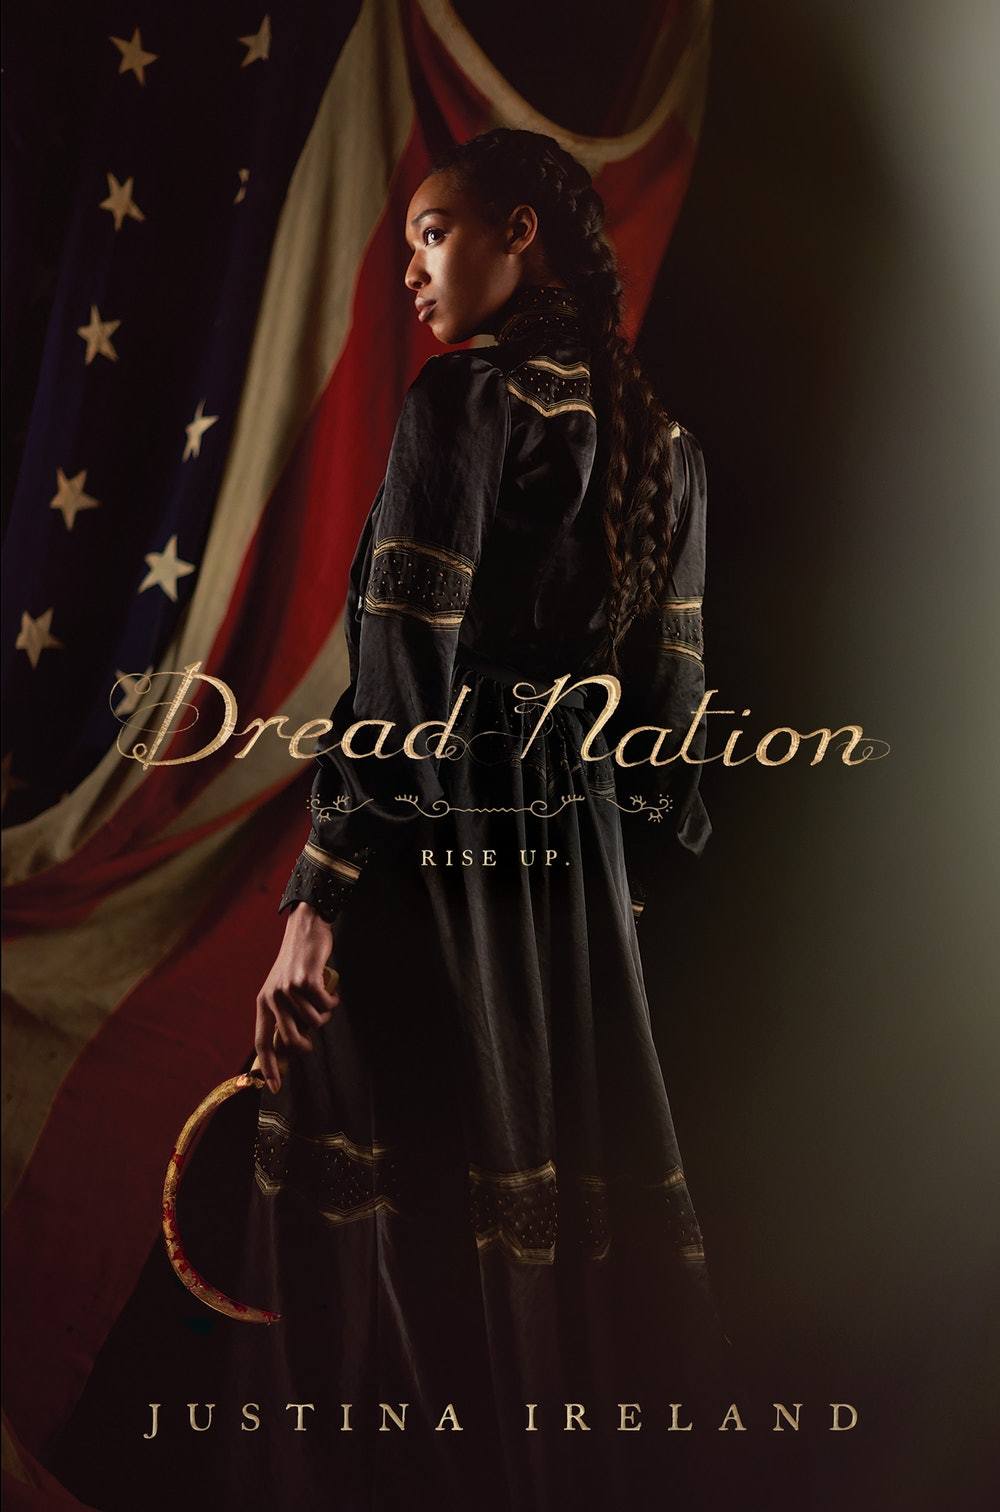 book cover for Dread Nation by Justine Ireland